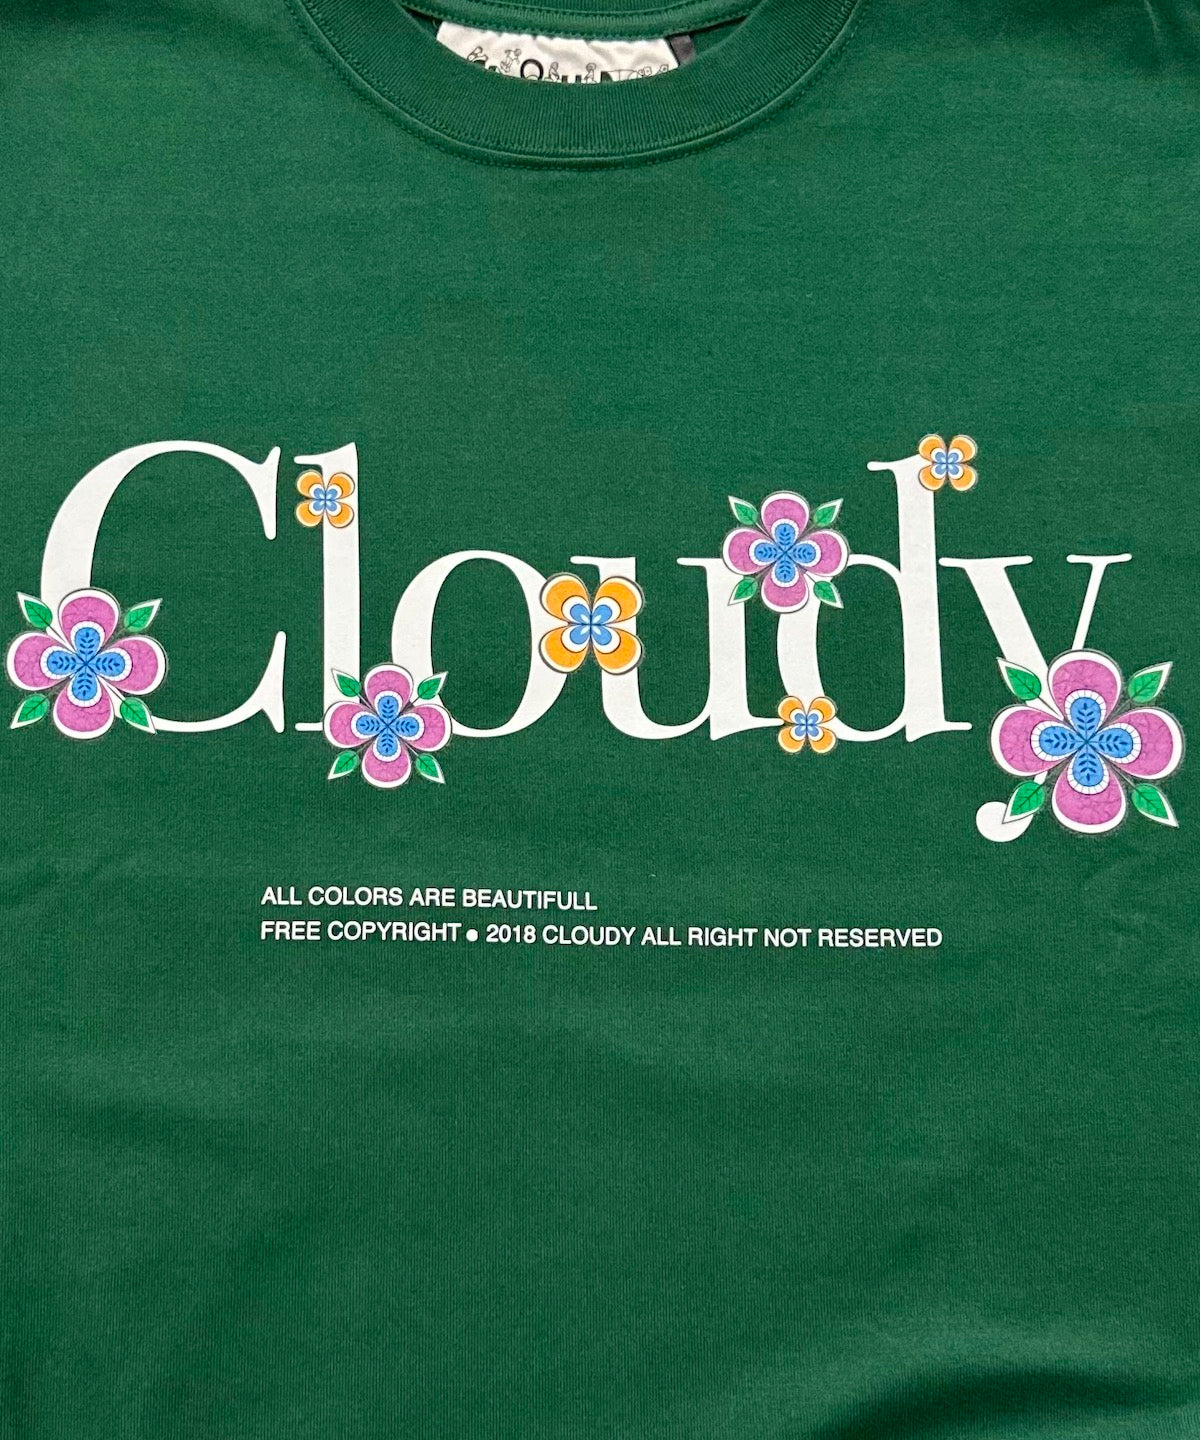 【For MAUI】Charity T-shirts GREEN